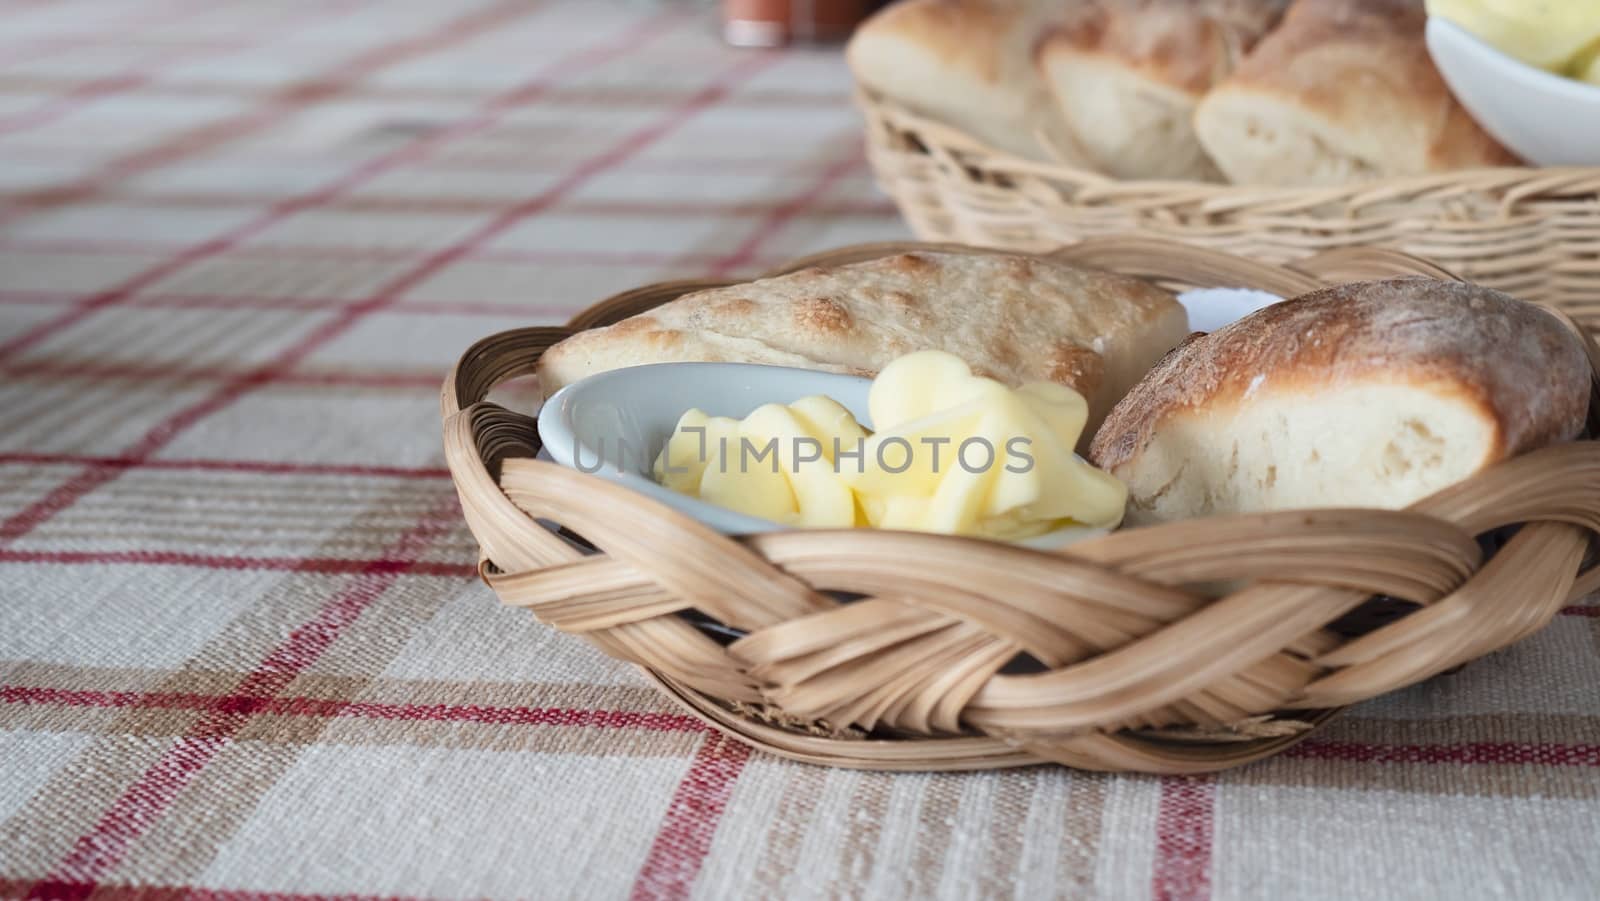 Bread with butter appetizer recipes - bread appetizer served before main course for background use